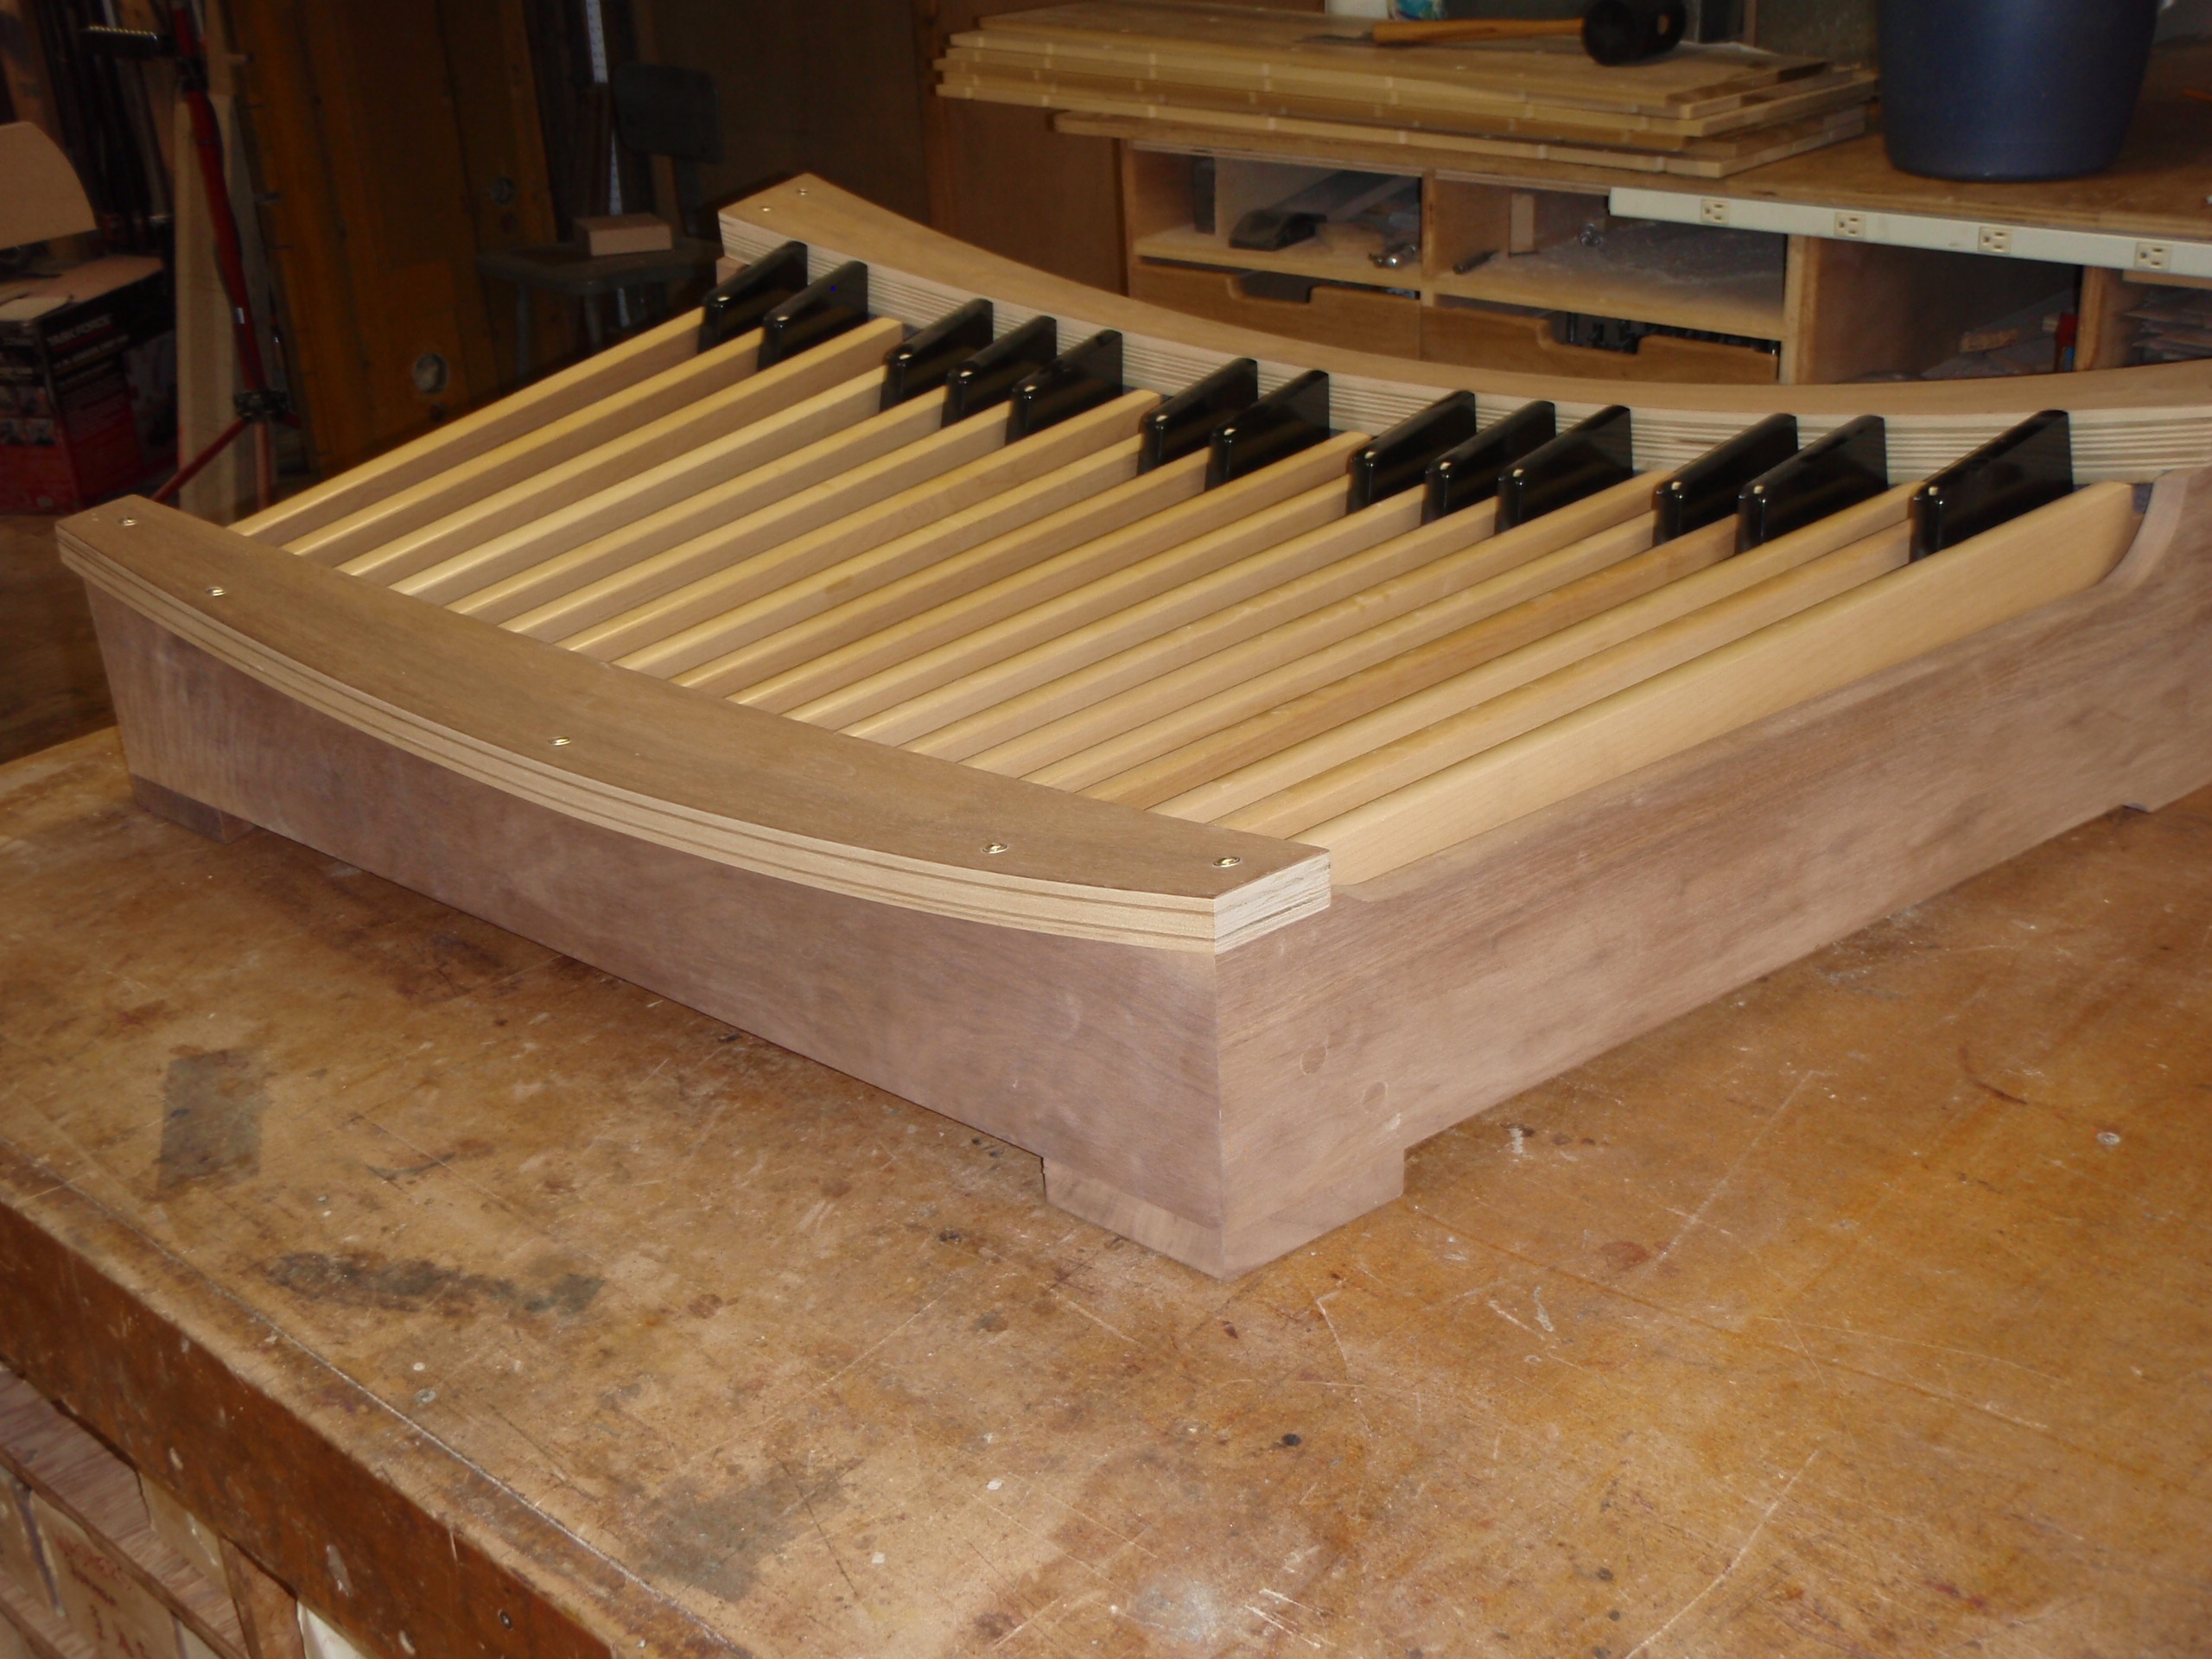 Pedal board ready for finishing.